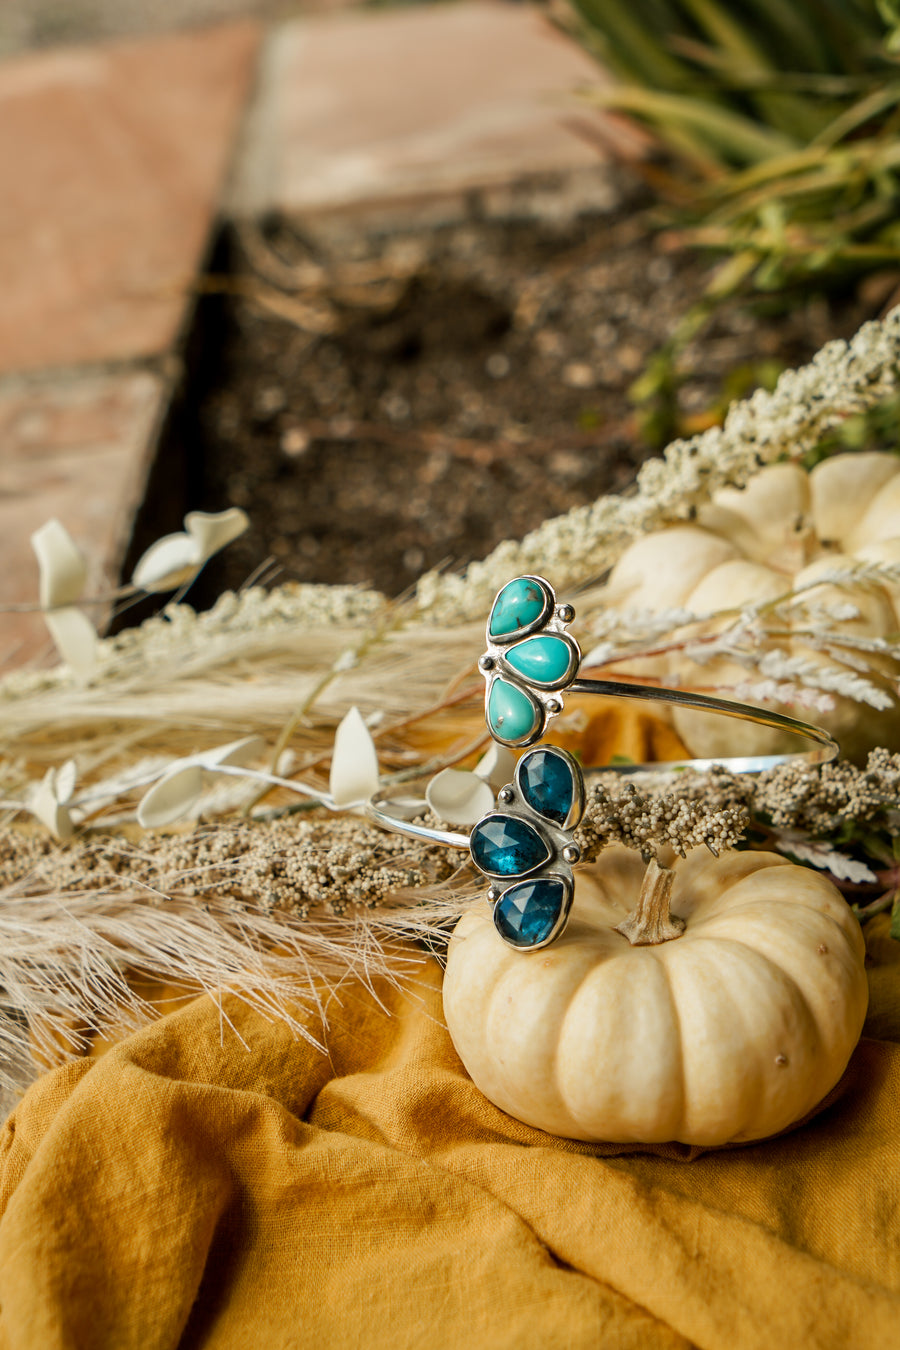 Boho Arm Band with Kyanite & Campitos Turquoise